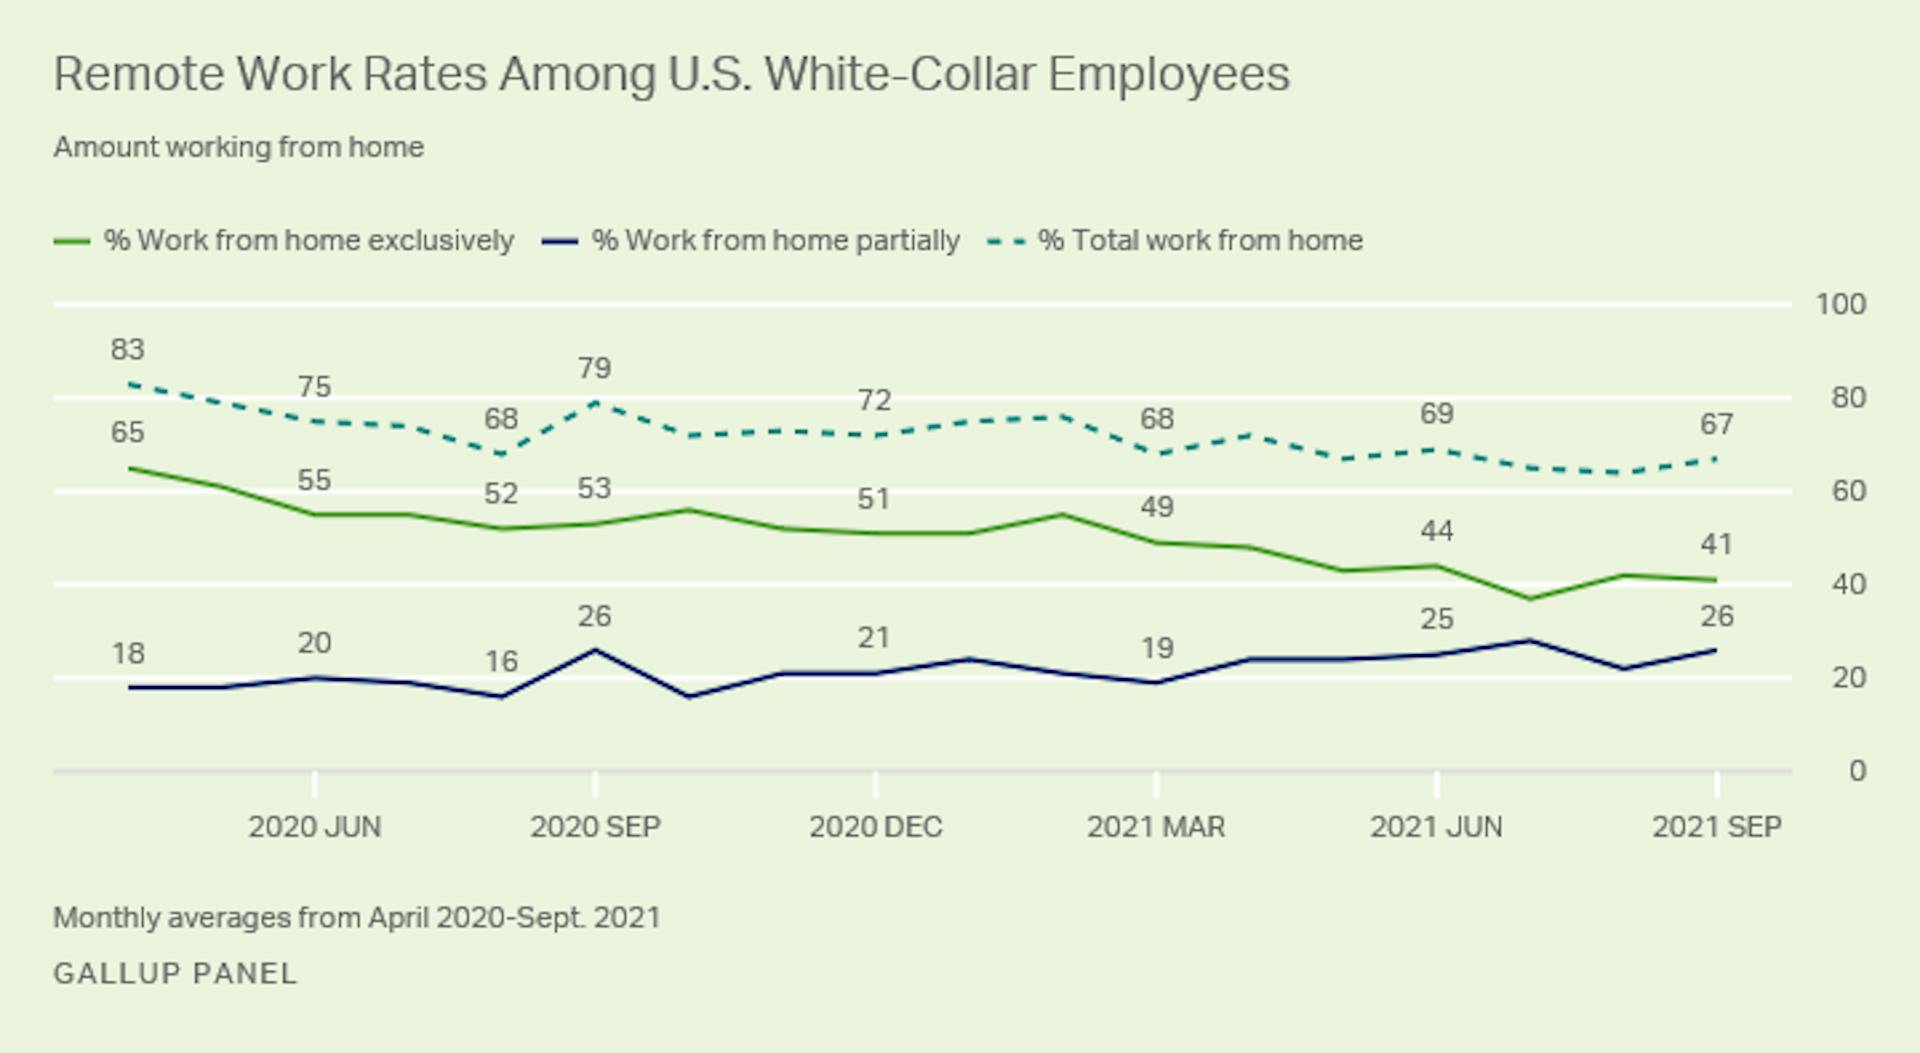 Source: https://news.gallup.com/poll/355907/remote-work-persisting-trending-permanent.aspx